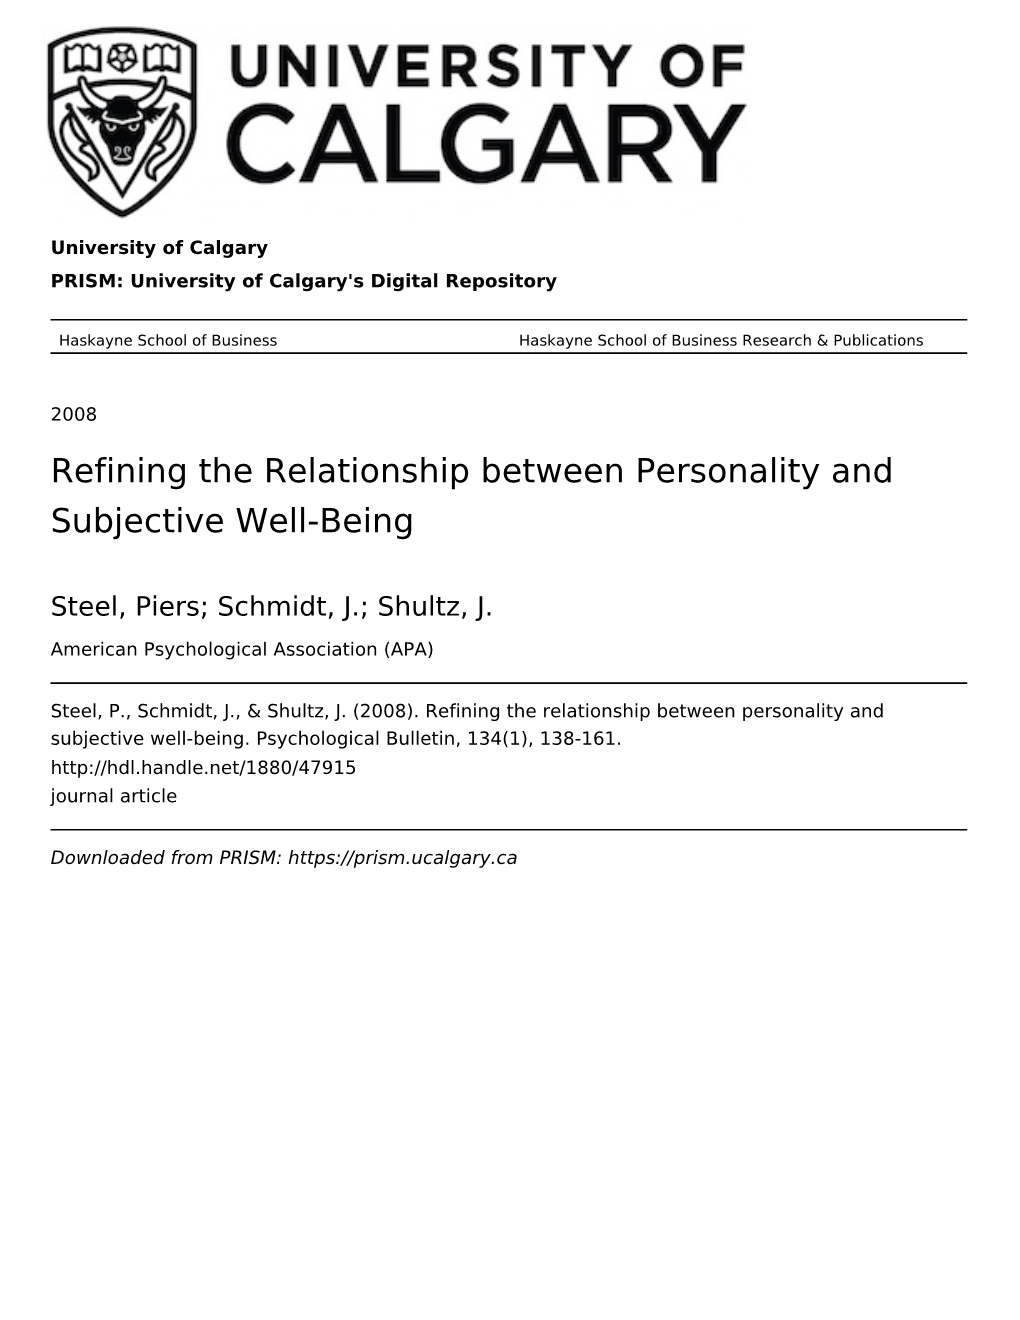 Refining the Relationship Between Personality and Subjective Well-Being